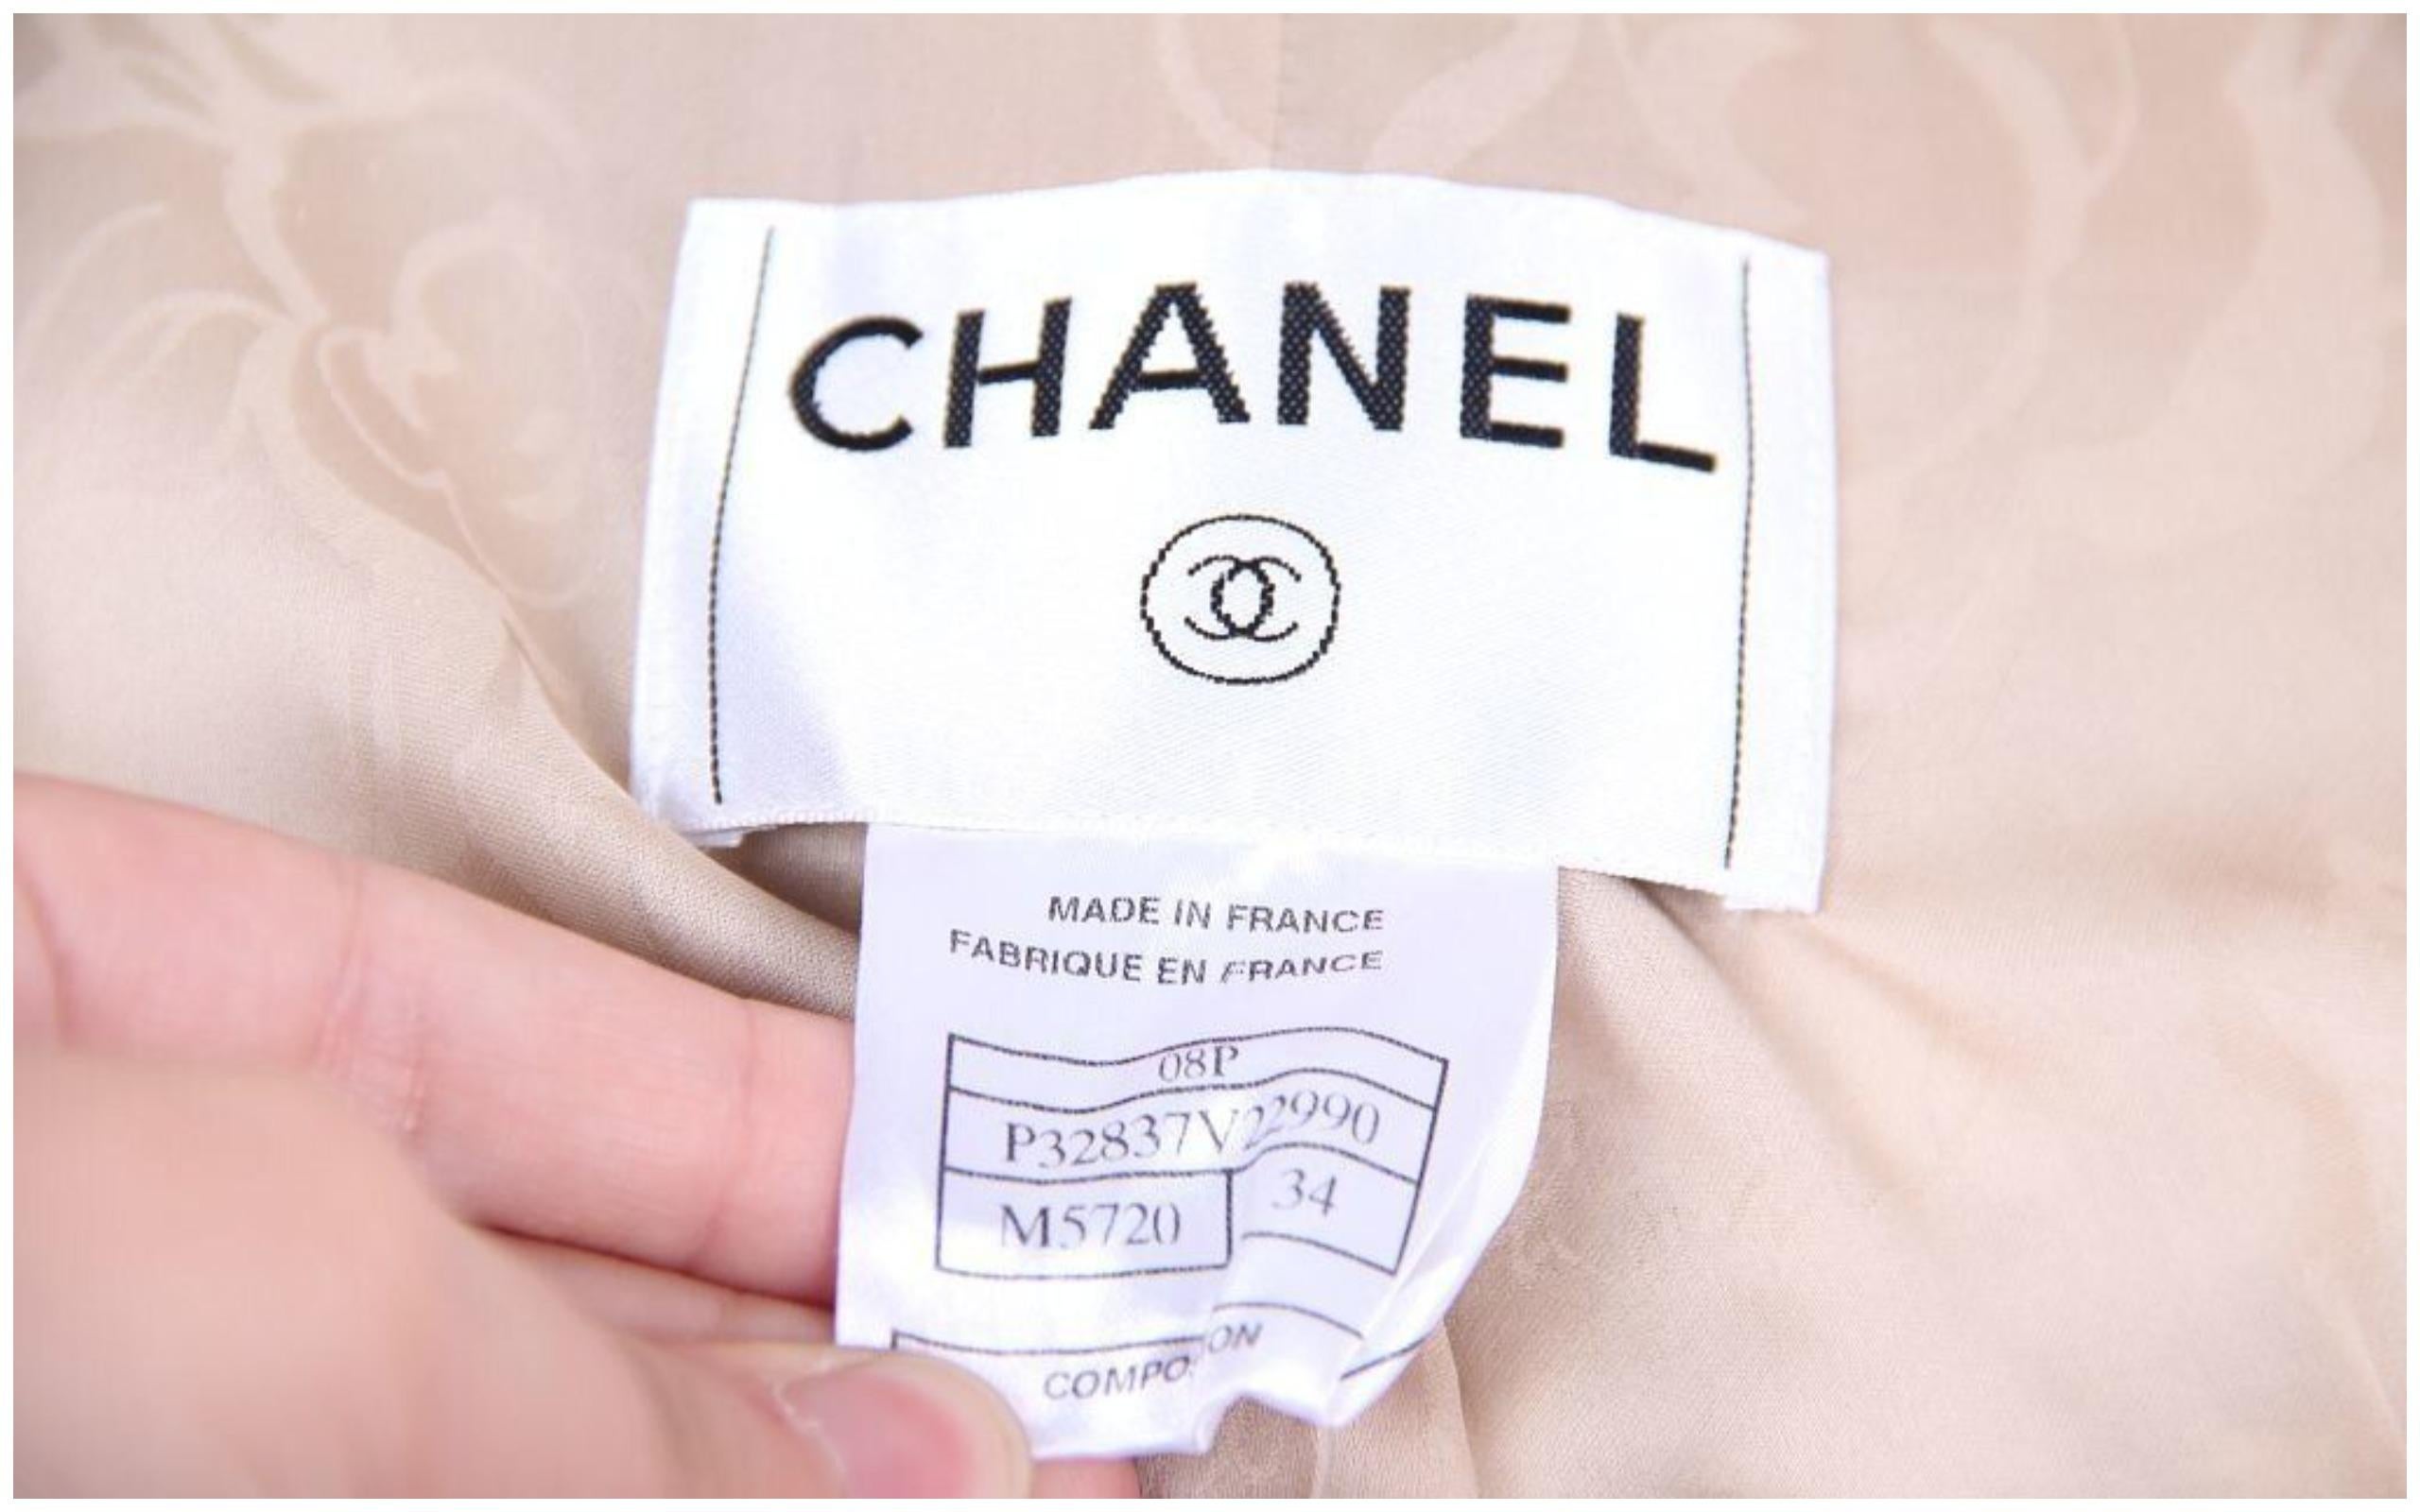 Chanel & Karl Lagerfeld 08P 2008 Beige/White Hound's-Tooth Tweed jacket 34 FR For Sale 5